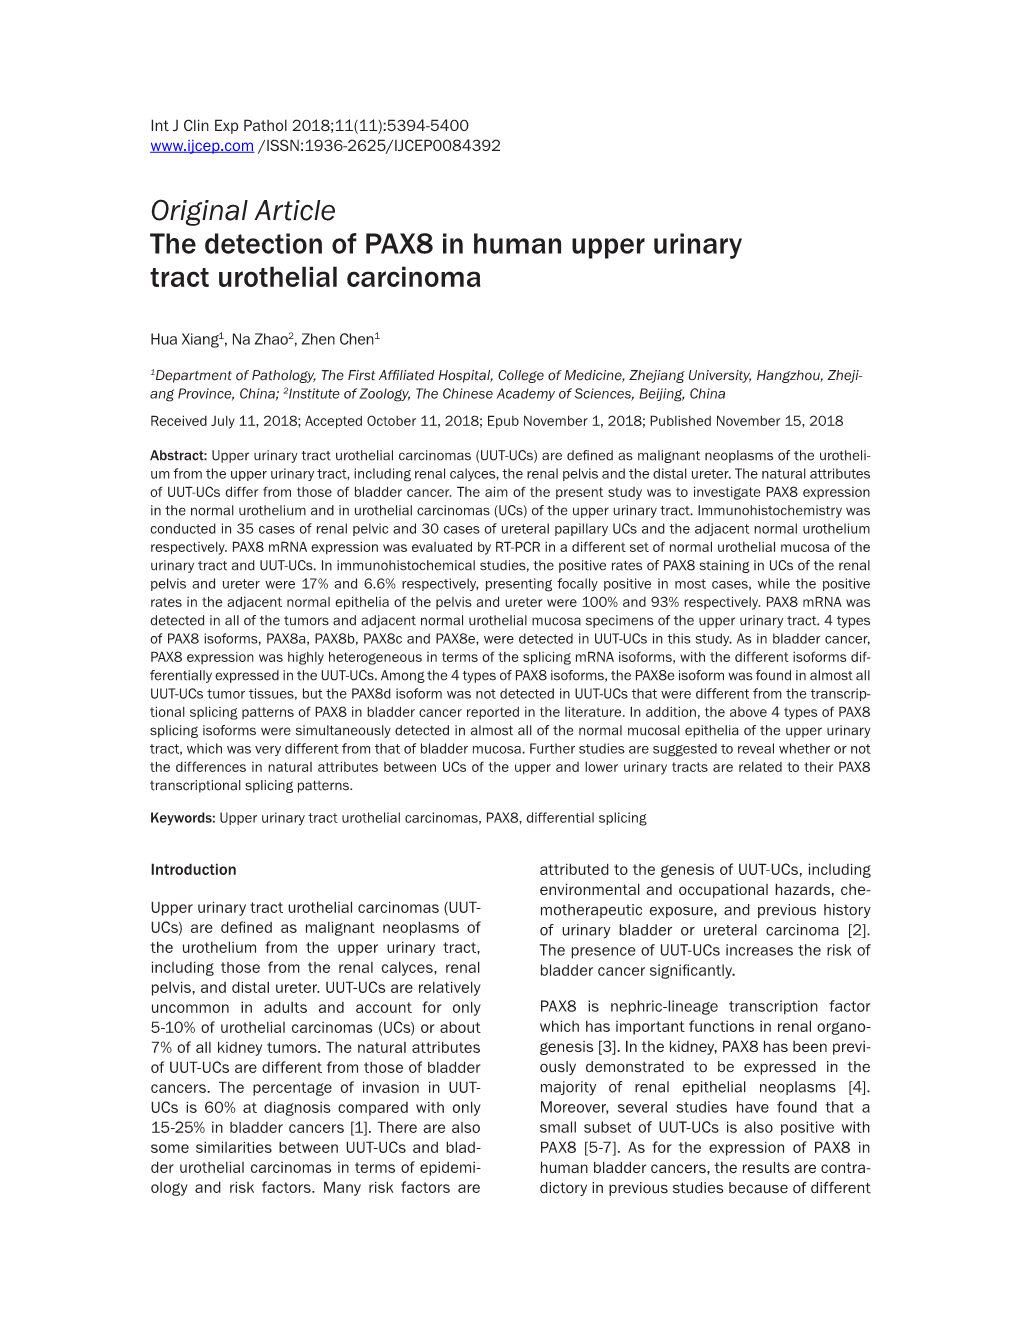 Original Article the Detection of PAX8 in Human Upper Urinary Tract Urothelial Carcinoma